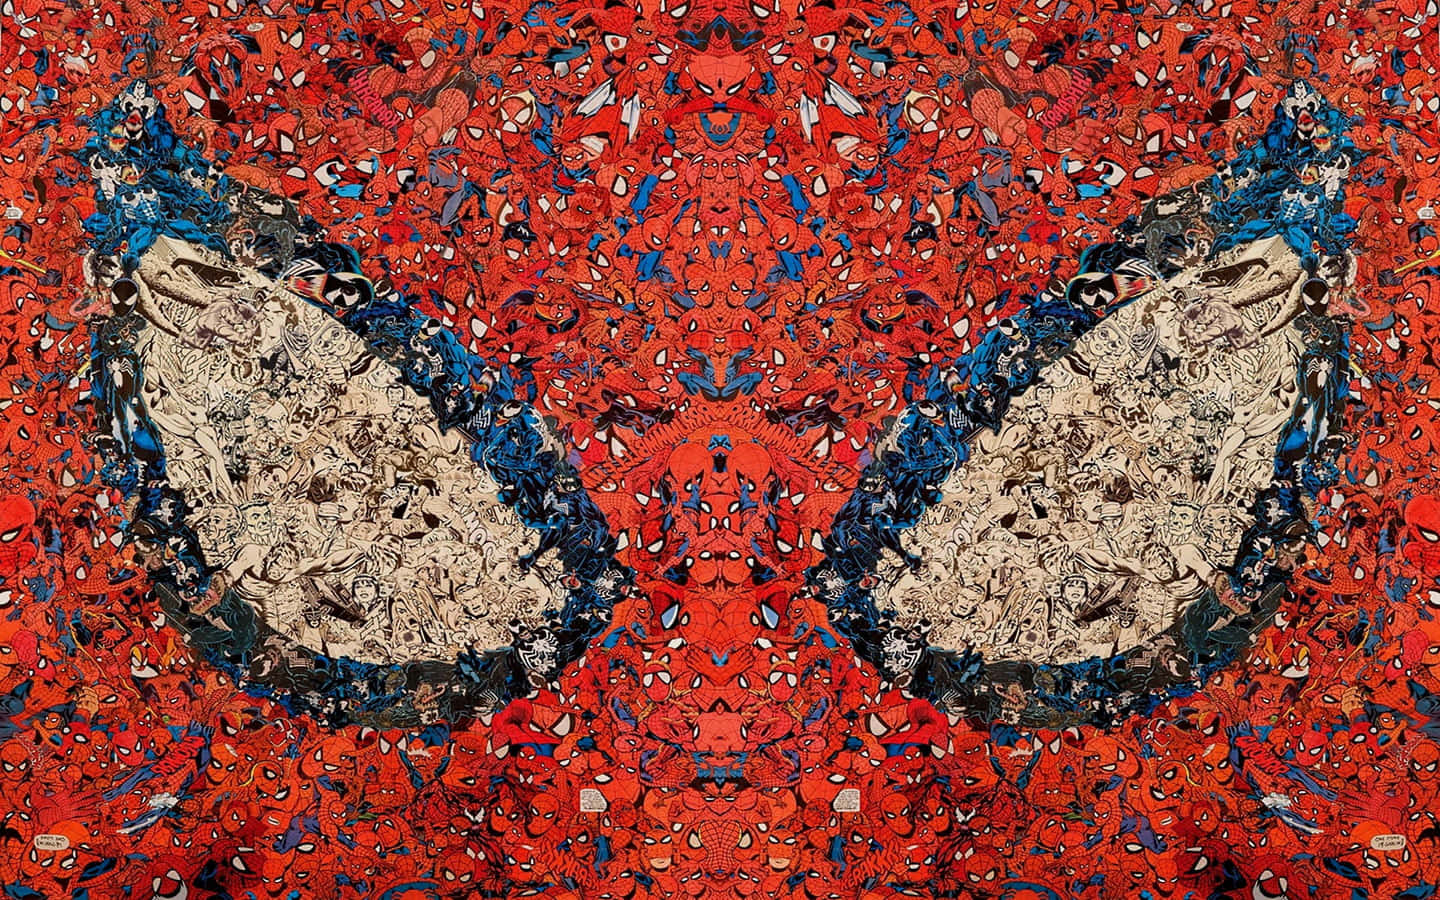 Spider - Man's Face In Red And Blue Paint